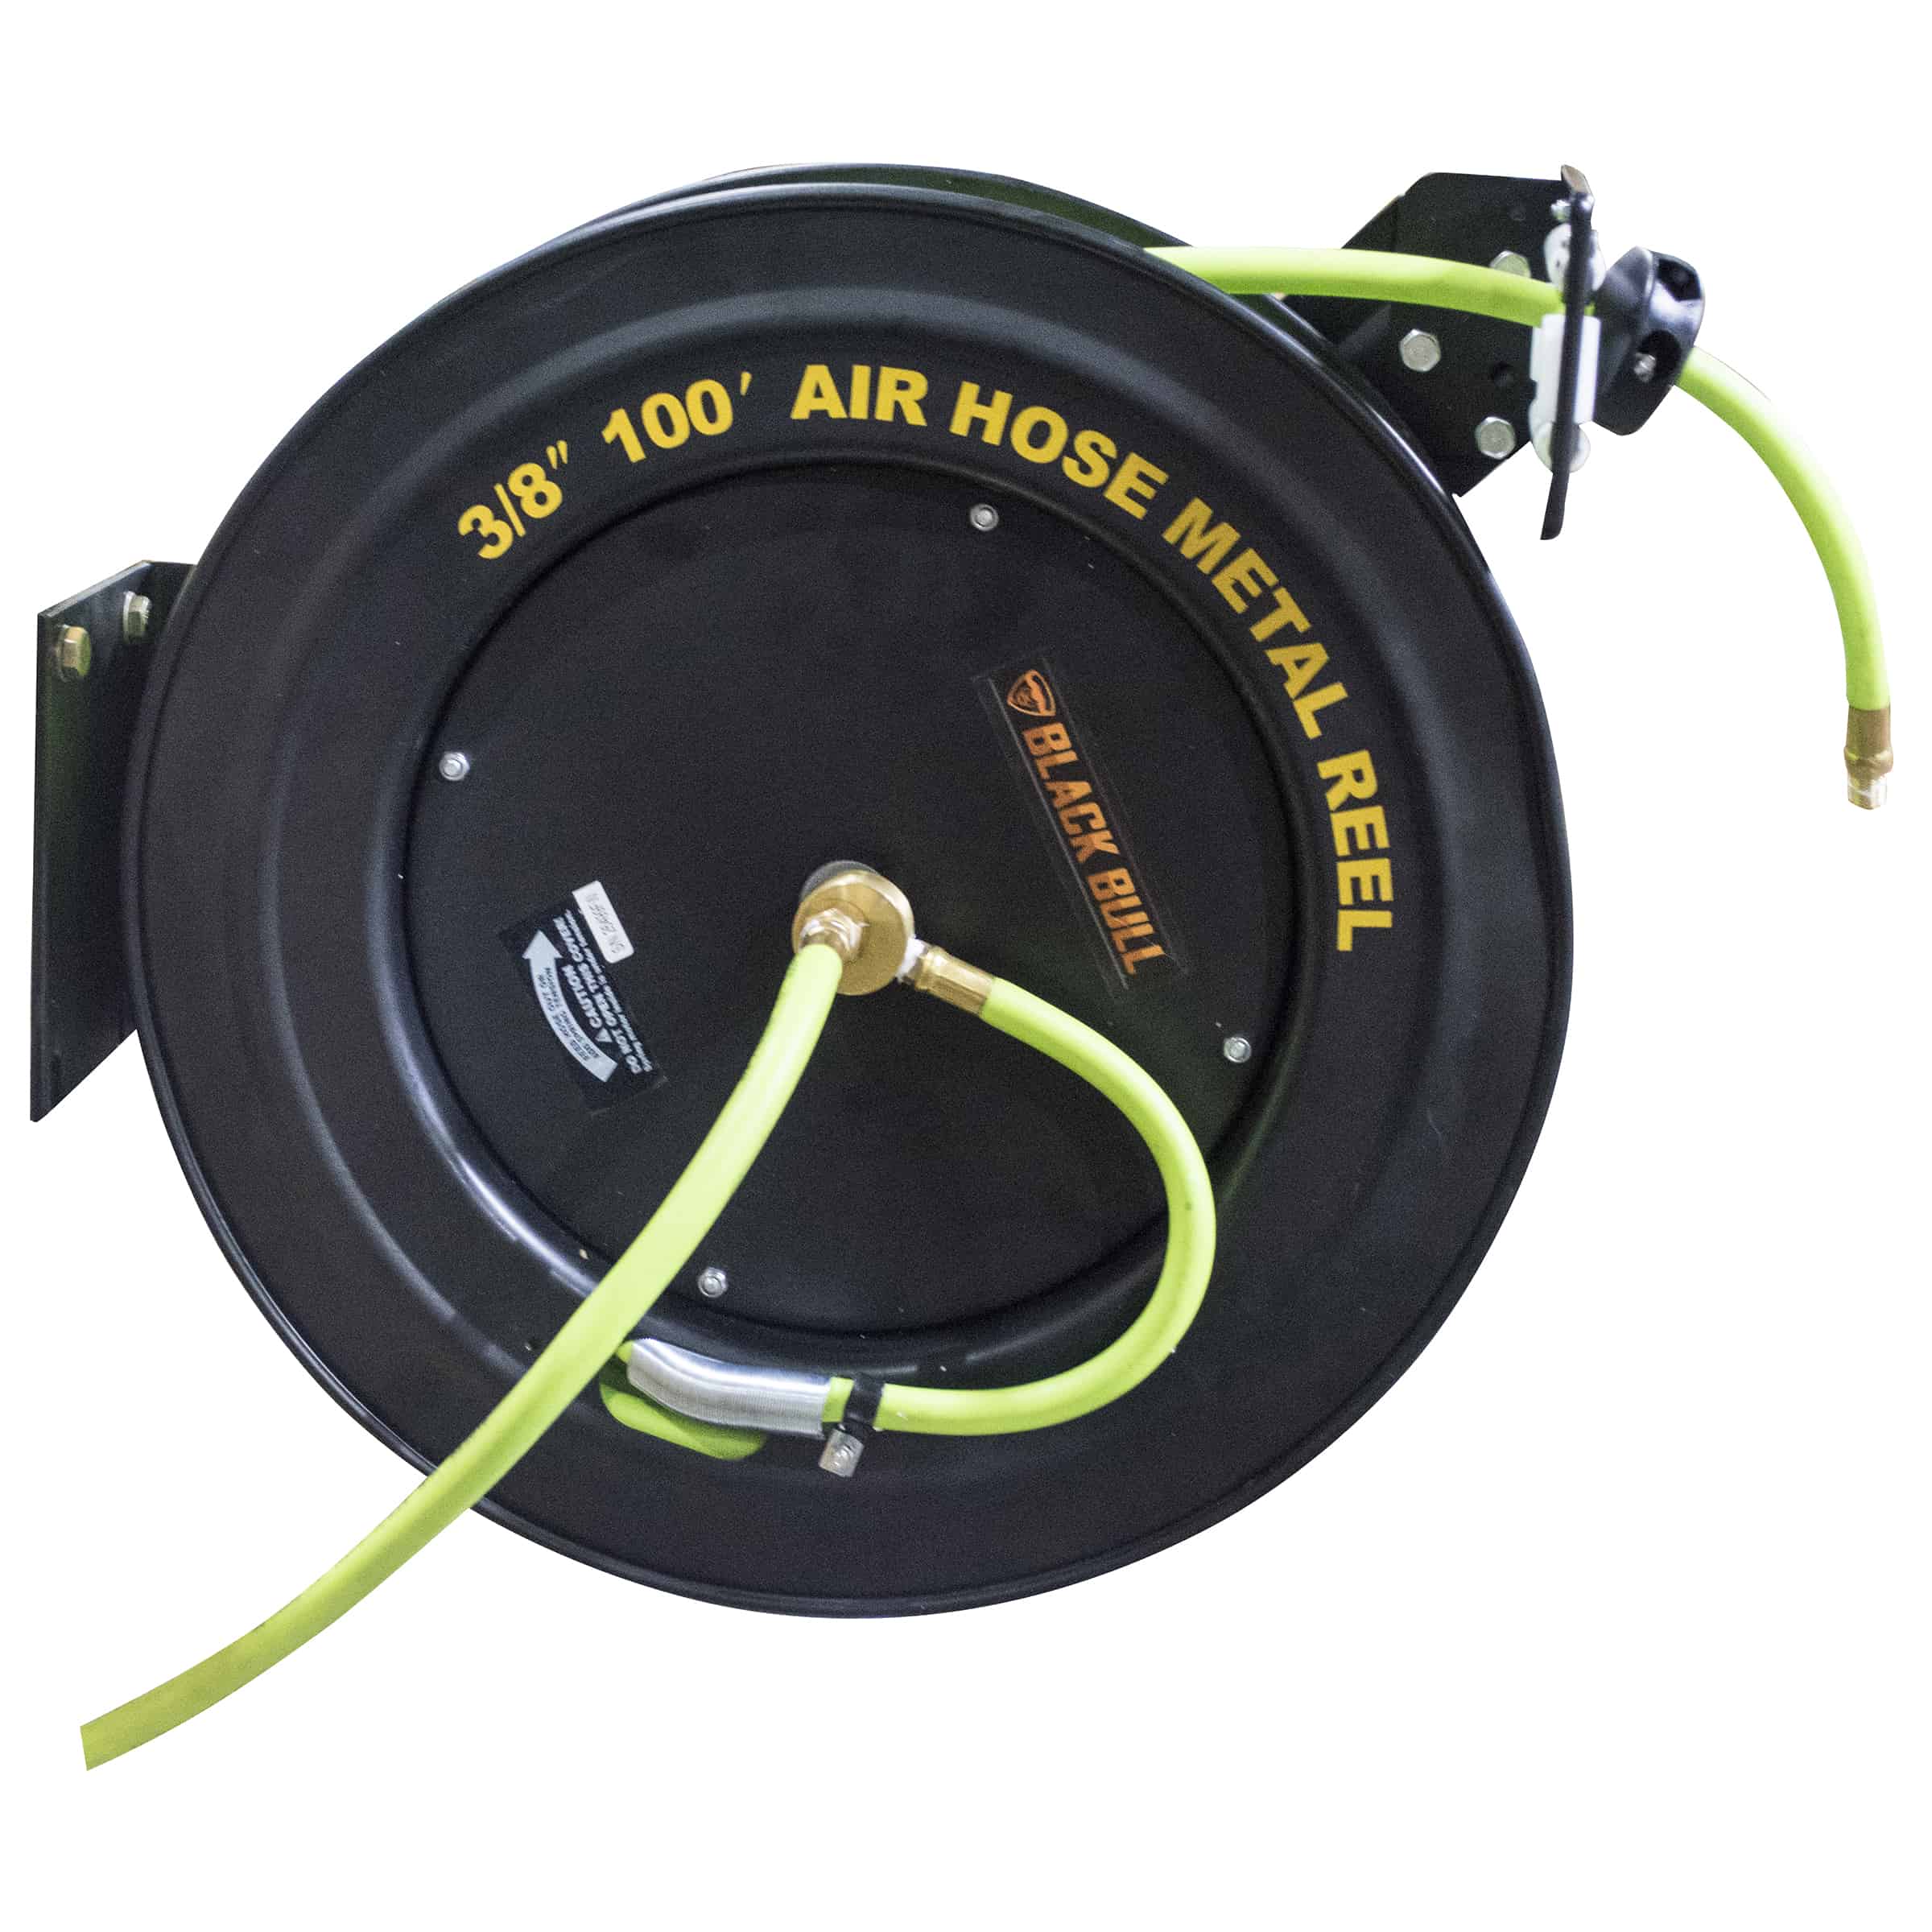 100 Foot Retractable Air Hose Reel with Auto Rewind - Black Bull 